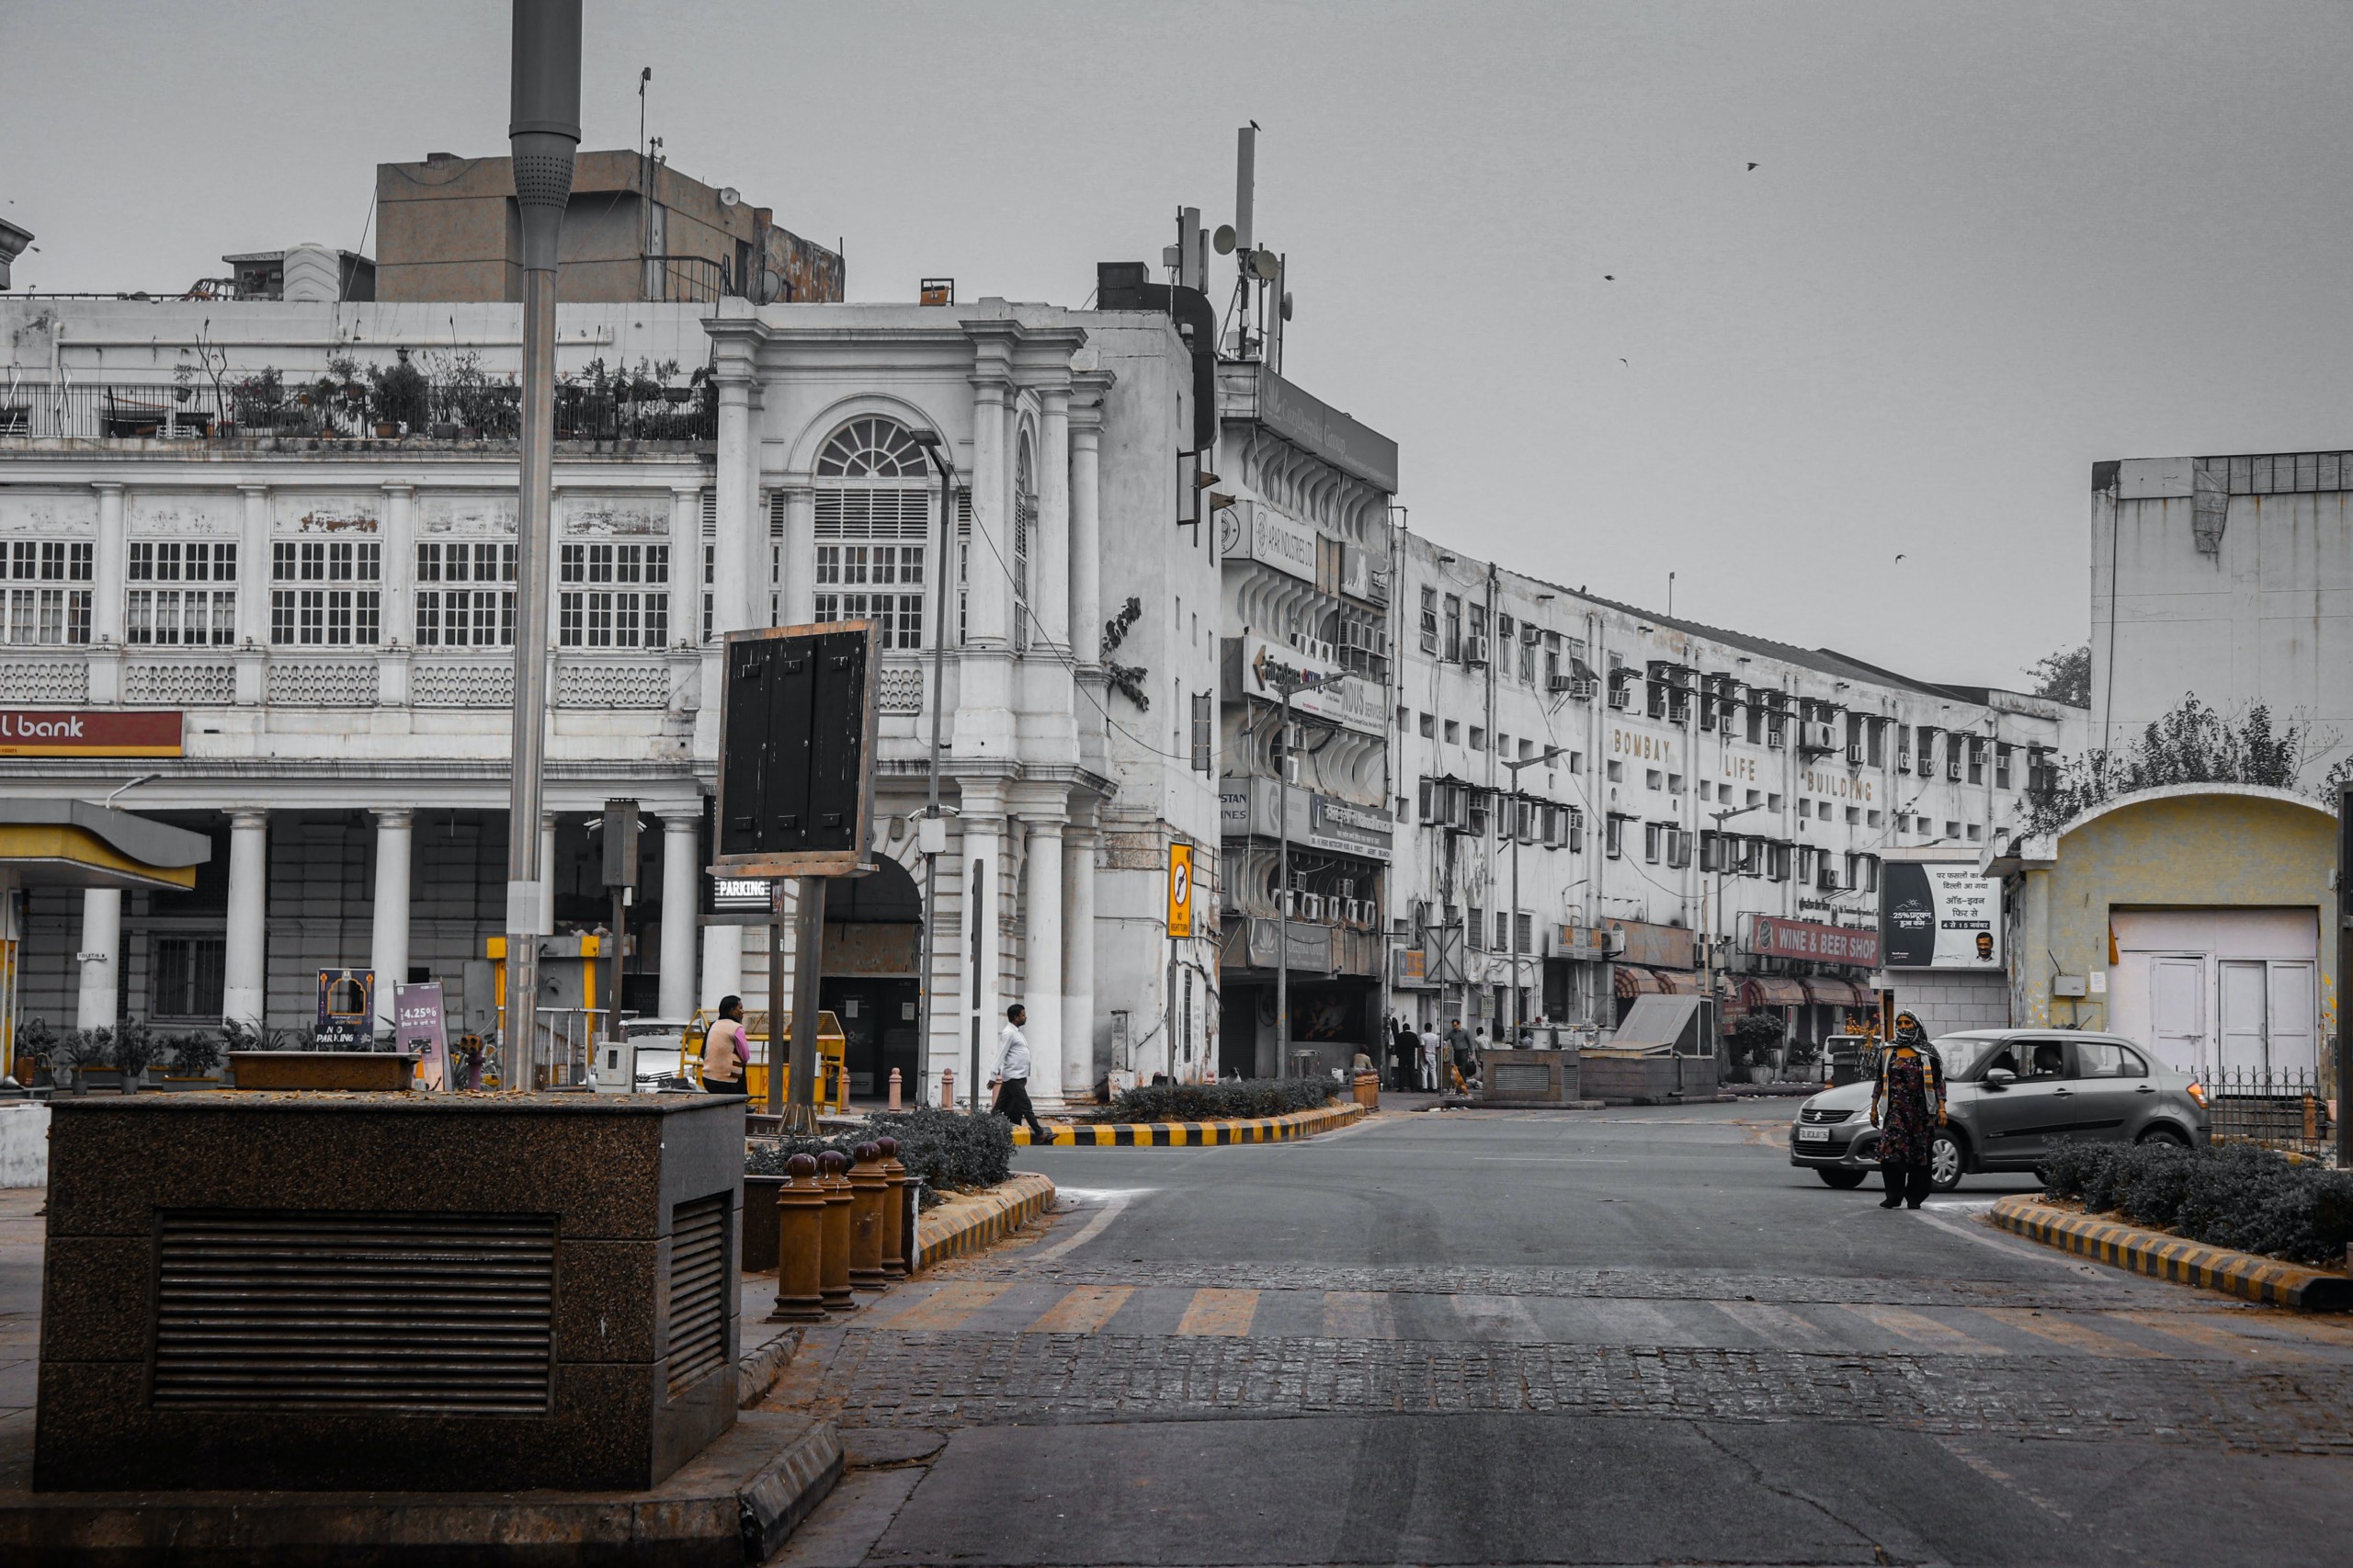 Located in the heart of the city, Connaught Place is your go-to place for discovering the best of the city's history